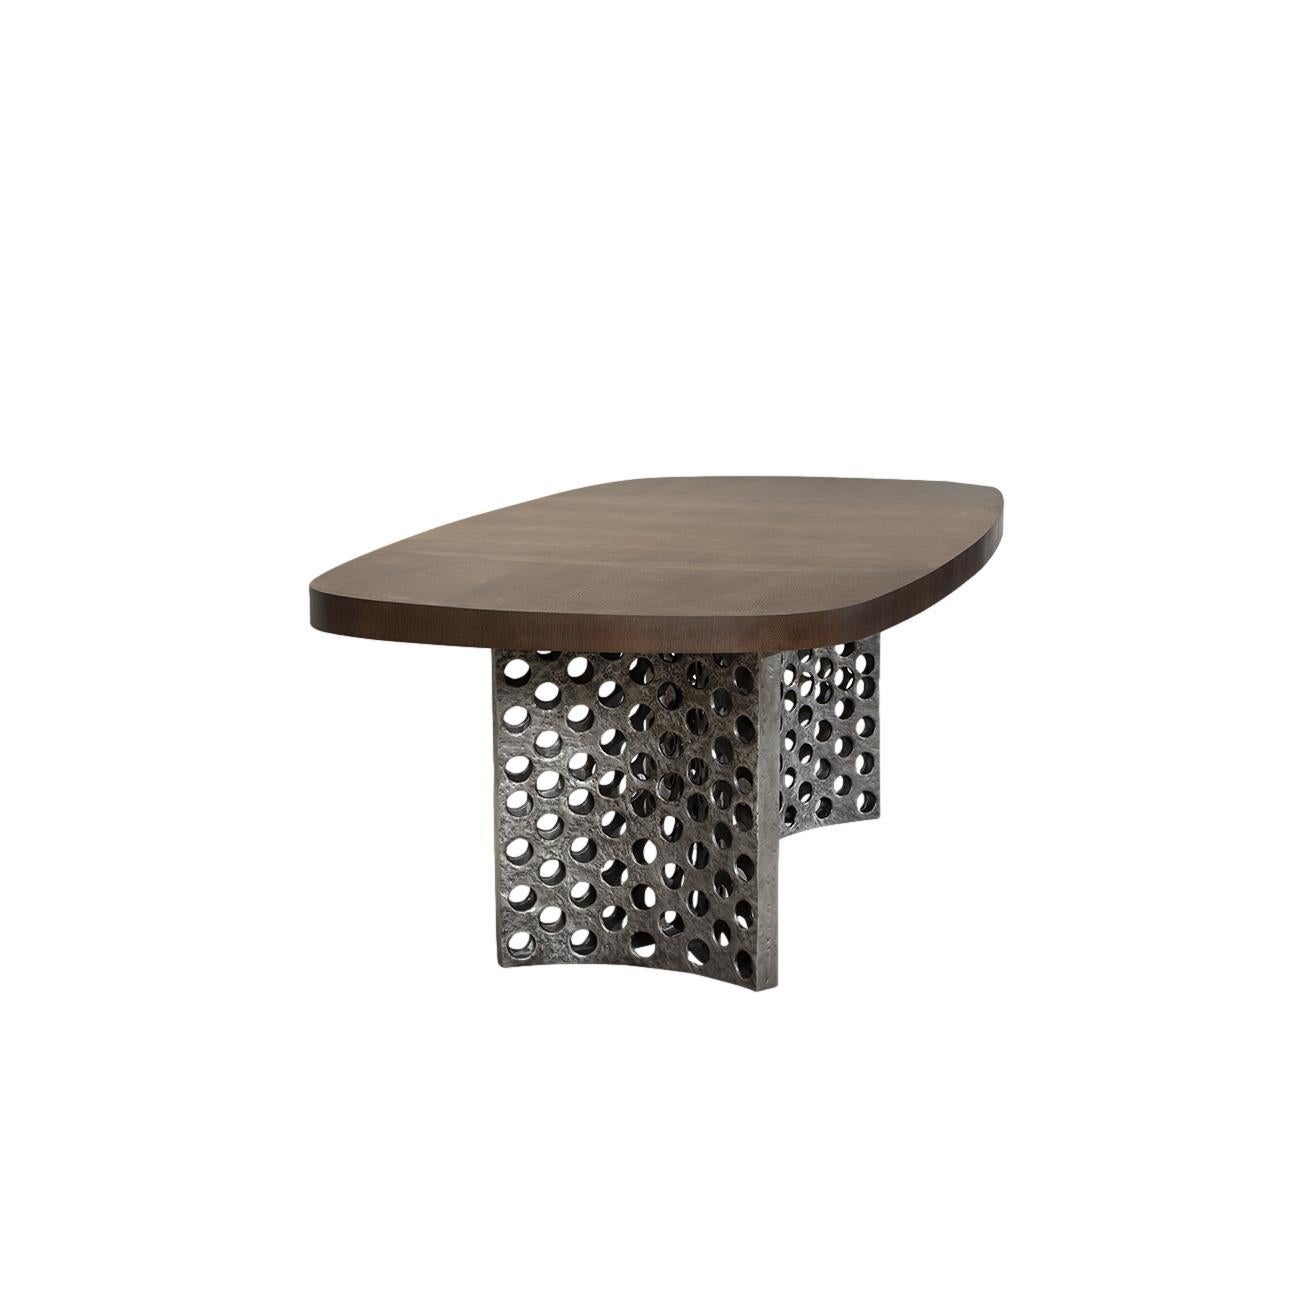 This table draws its name from the propeller shape of its base which is softened by the sculptural honeycomb texture of its cast aluminum base.
This dining table features a burnt cast aluminum base with glass surface.
Other finishes and dimensions